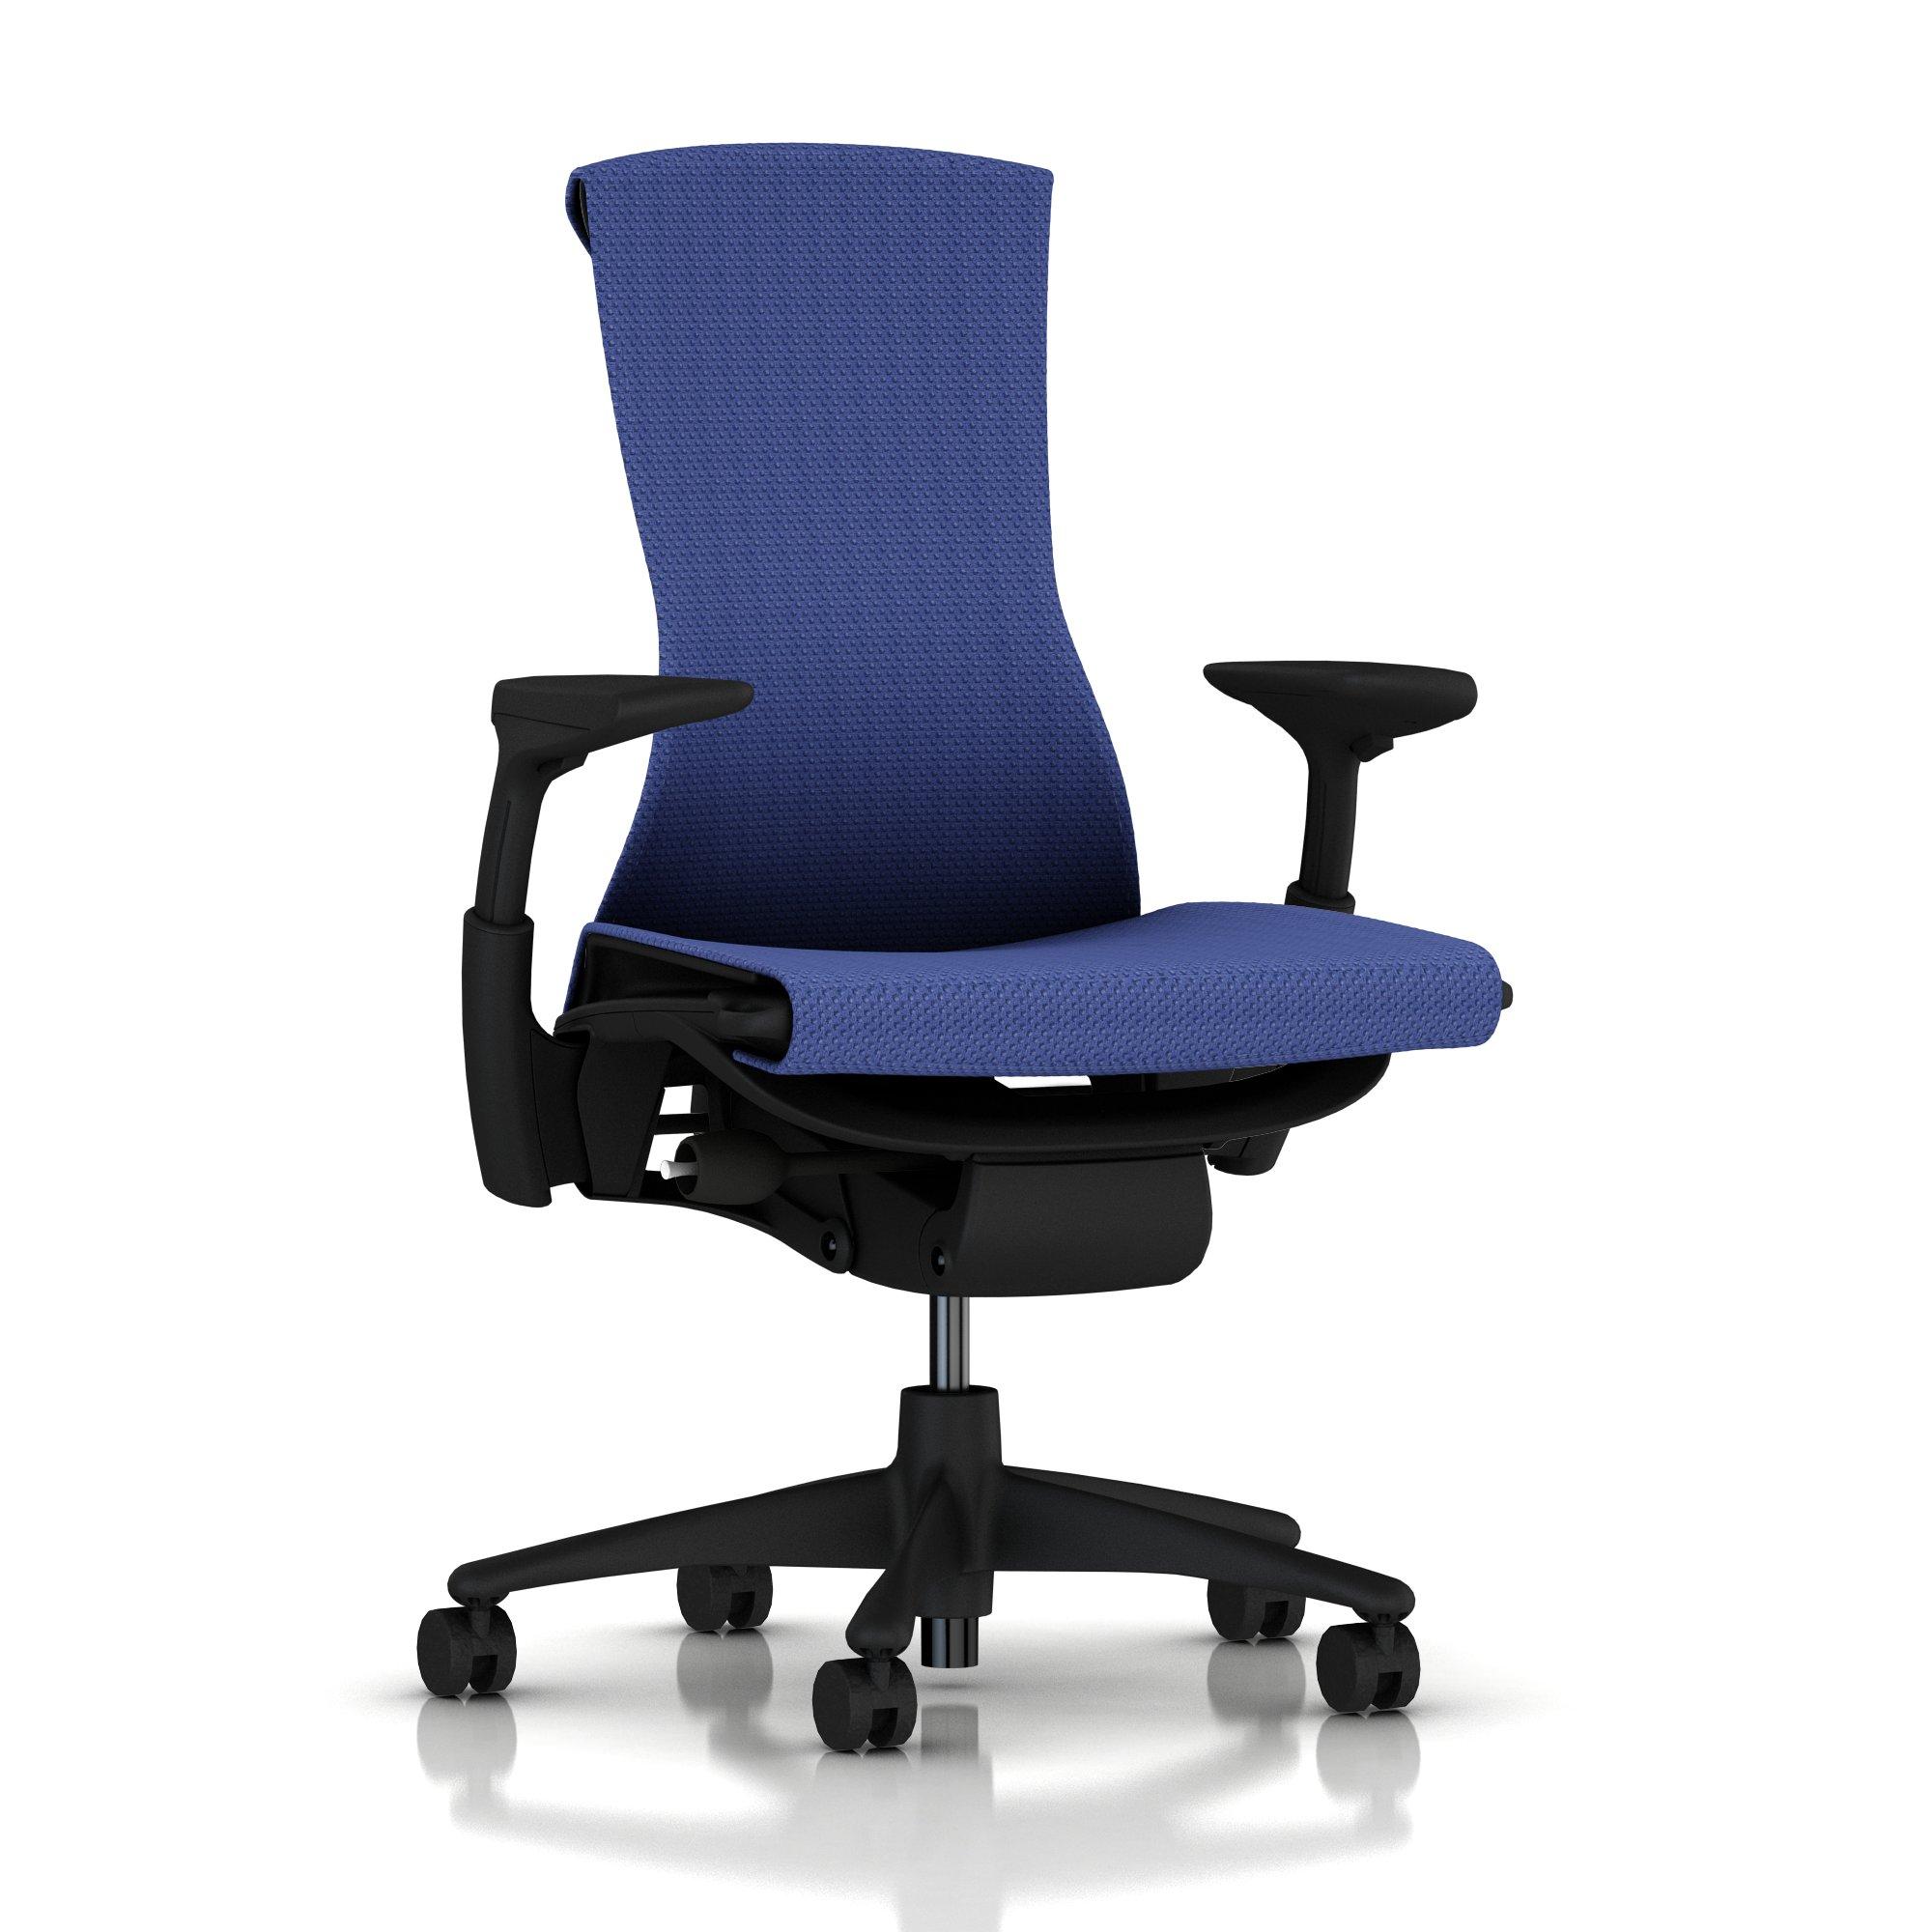 Embody Chair Iris Blue Balance with Graphite Frame by Herman Miller